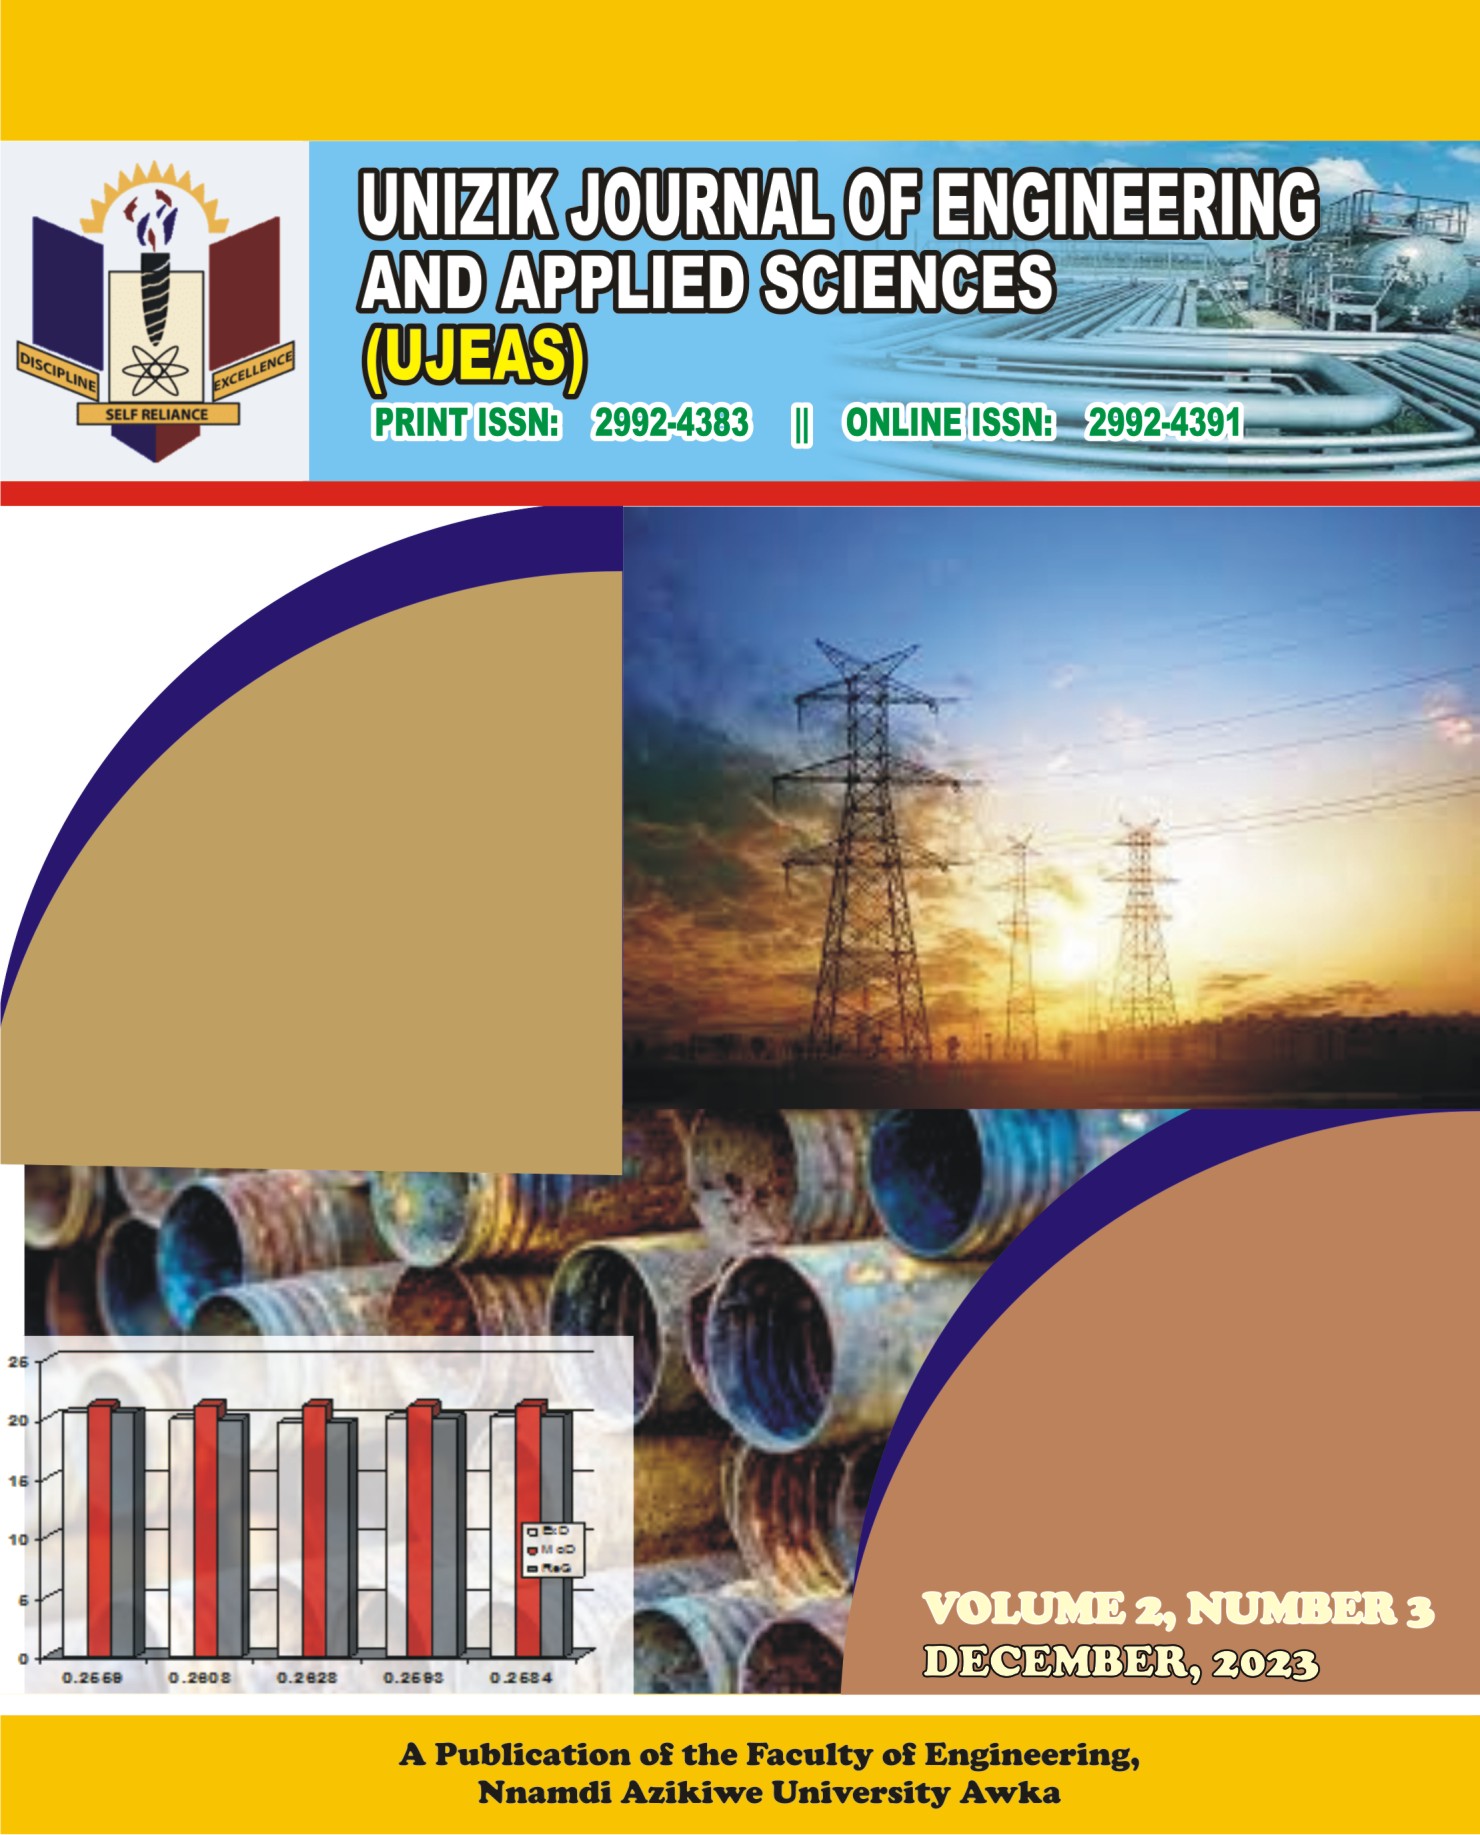 					View Vol. 2 No. 3 (2023): UNIZIK Journal of Engineering and Applied Sciences
				